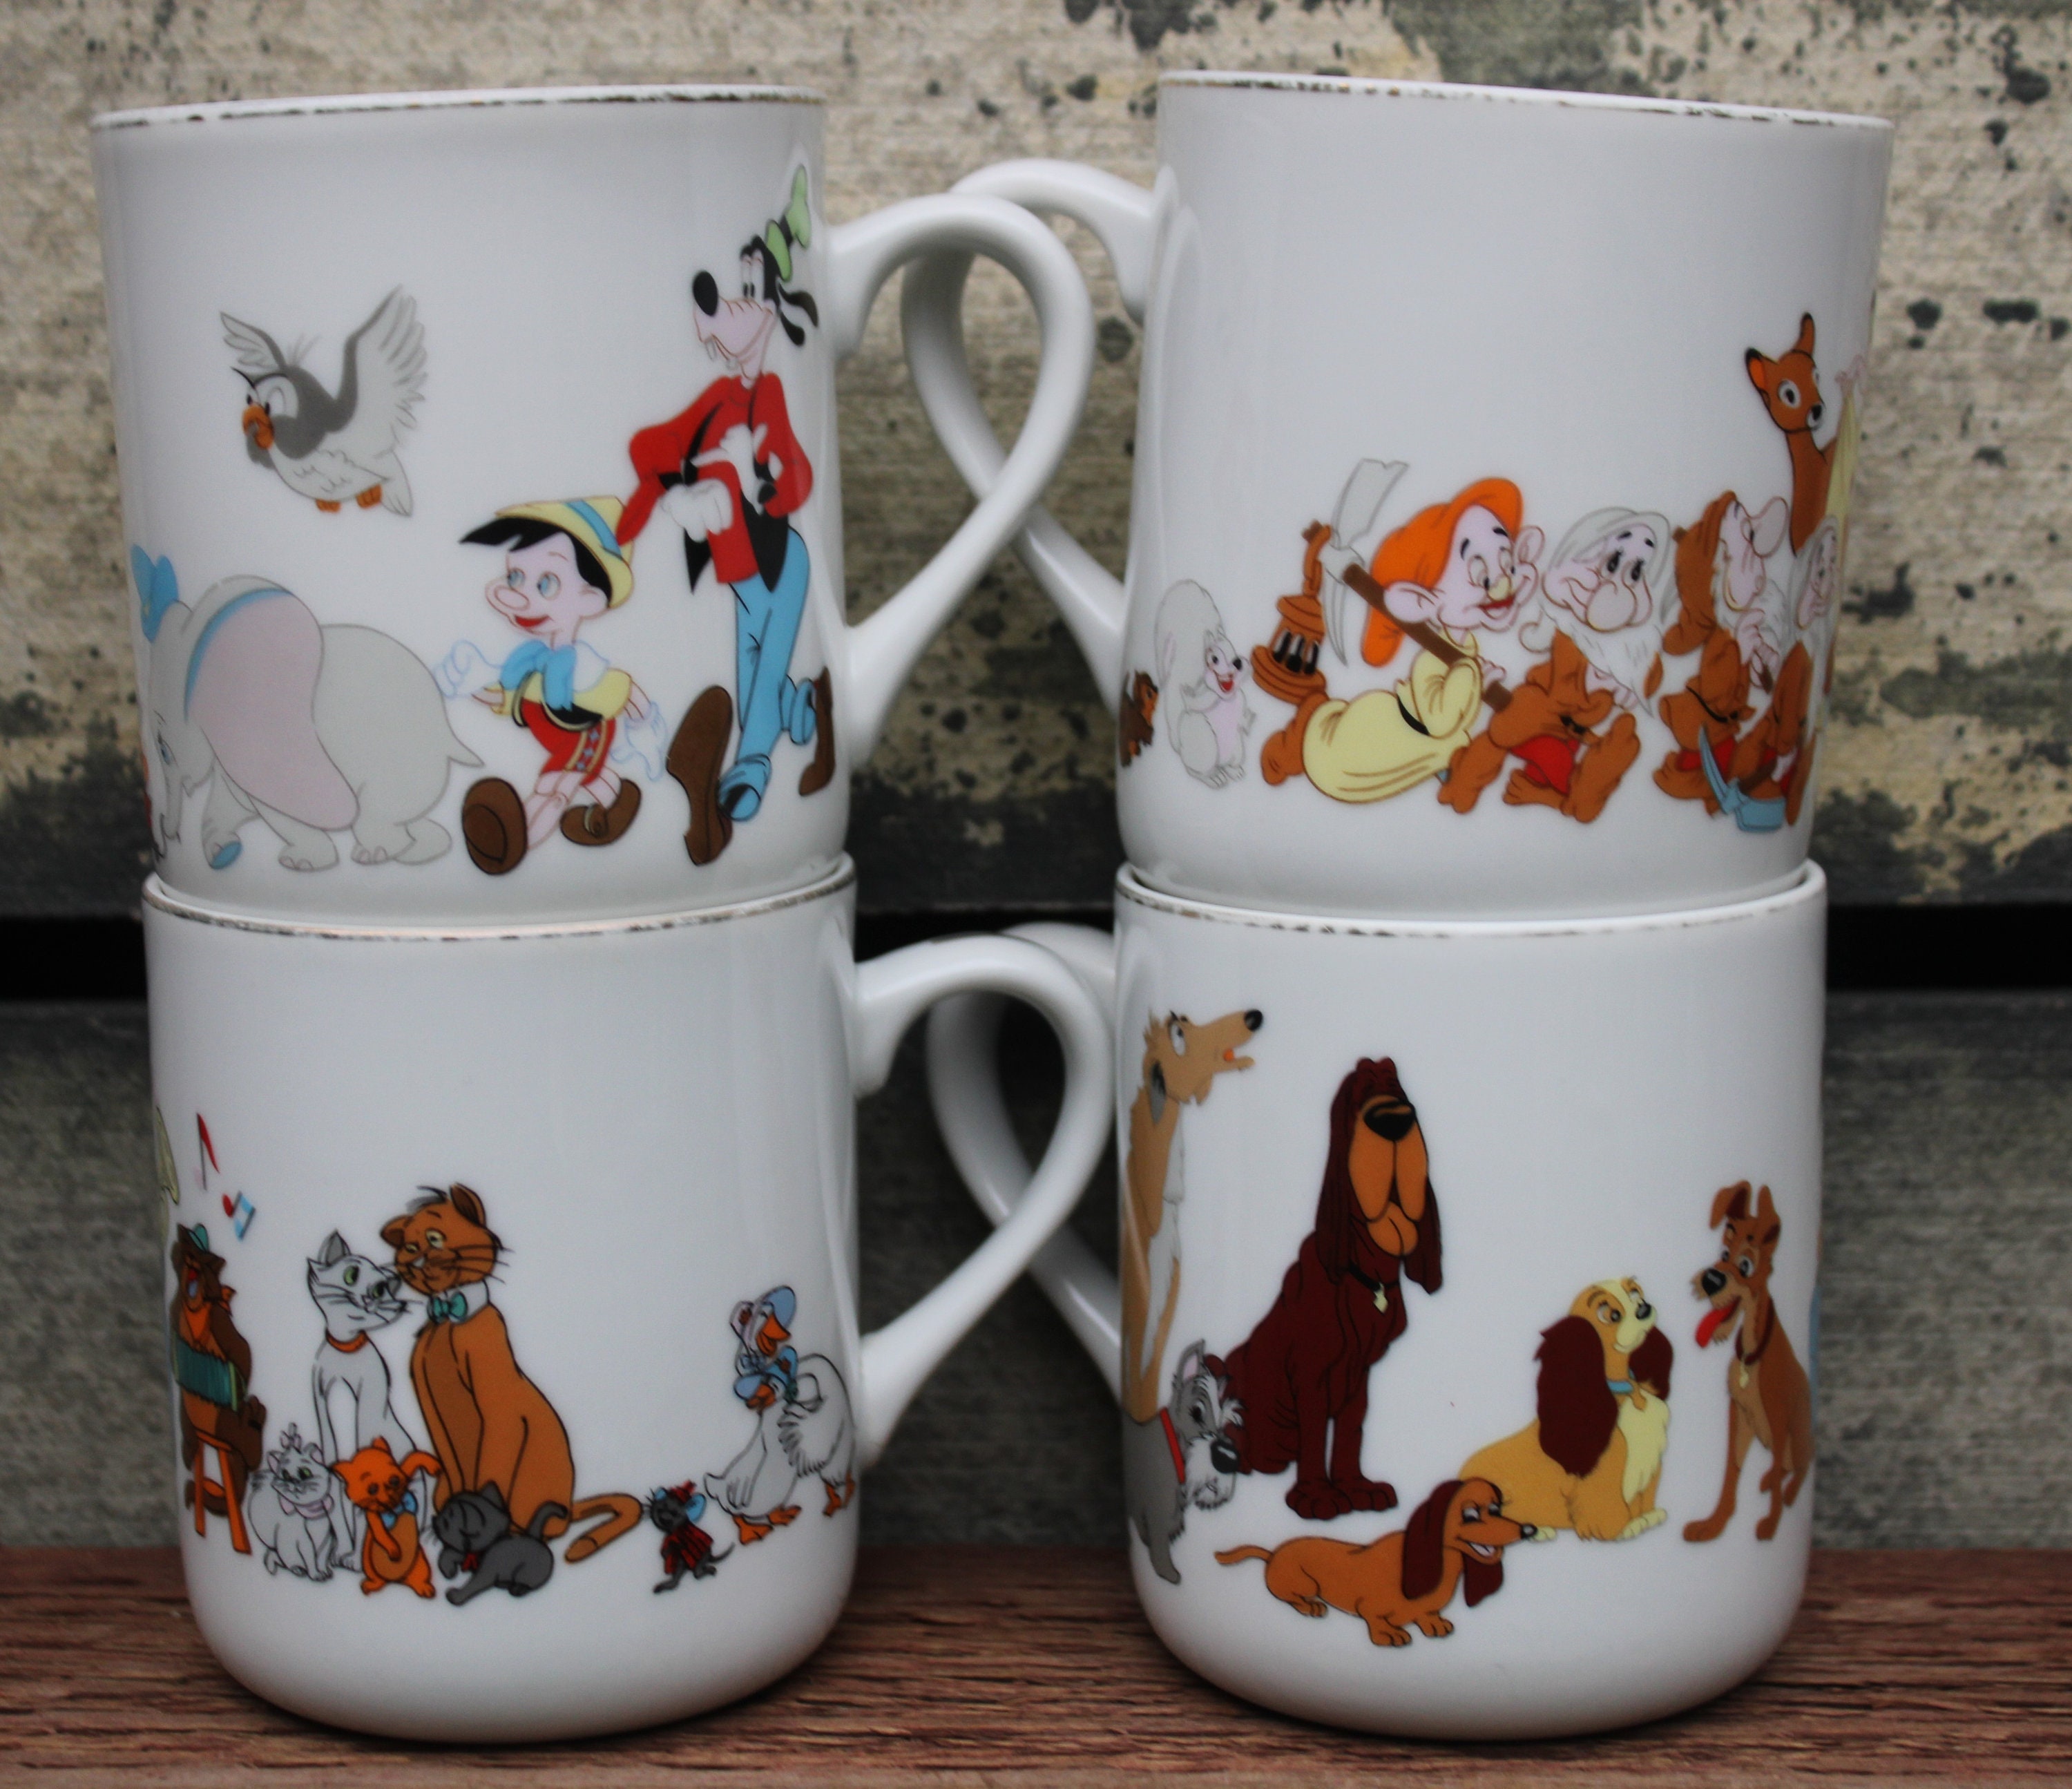 Vintage , Set of 4 Disney Mugs, 1960's,japan, Disney Characters, Coffee Cups,  Snow White, Pinocchio, Dumbo, Lady and the Tramp, Aristocats 